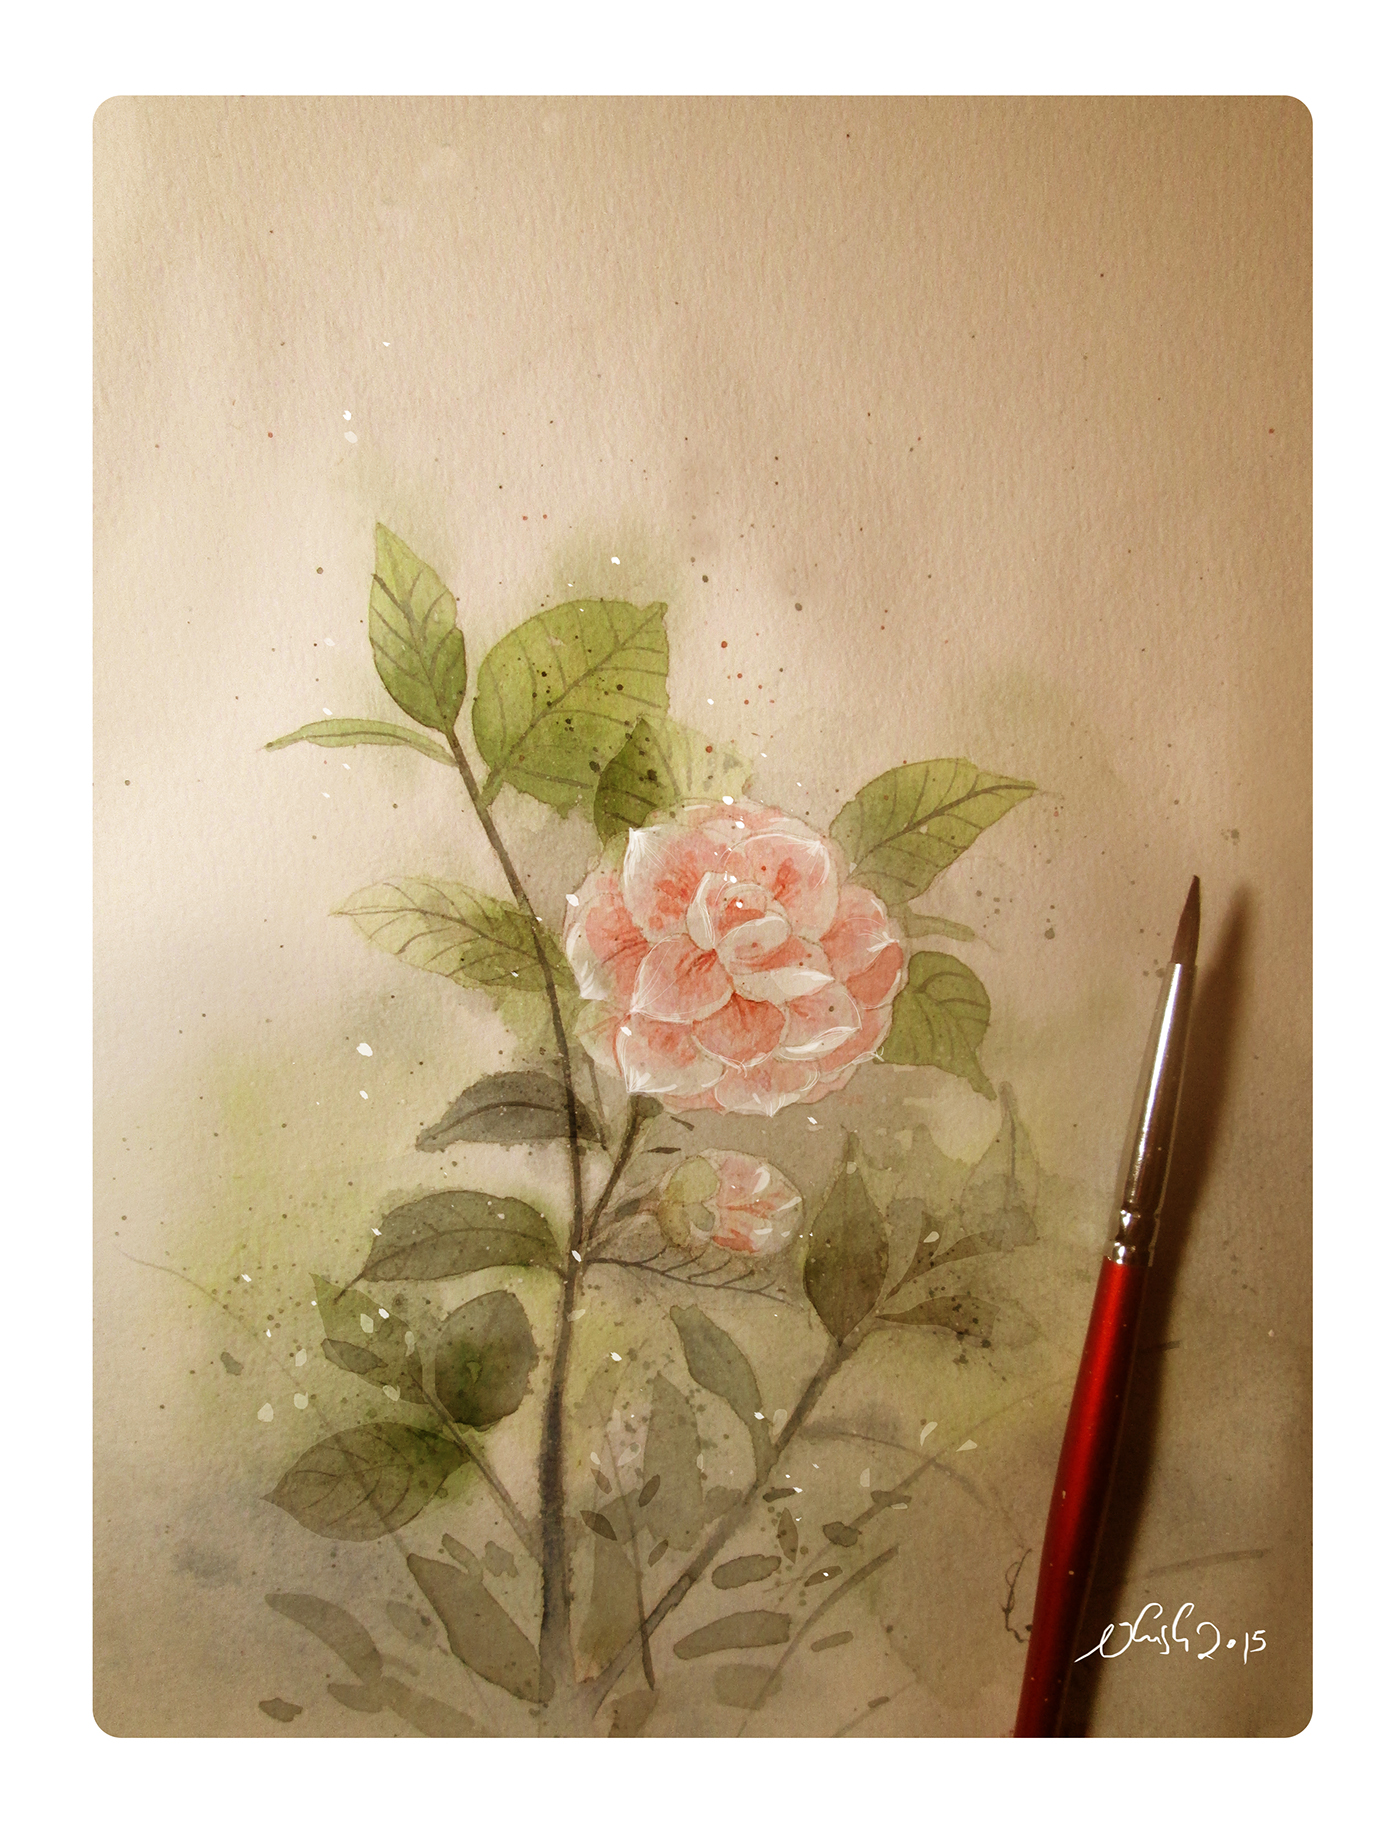 flower artwork Drawing  inspiration tradition art watercolor watercolor painting